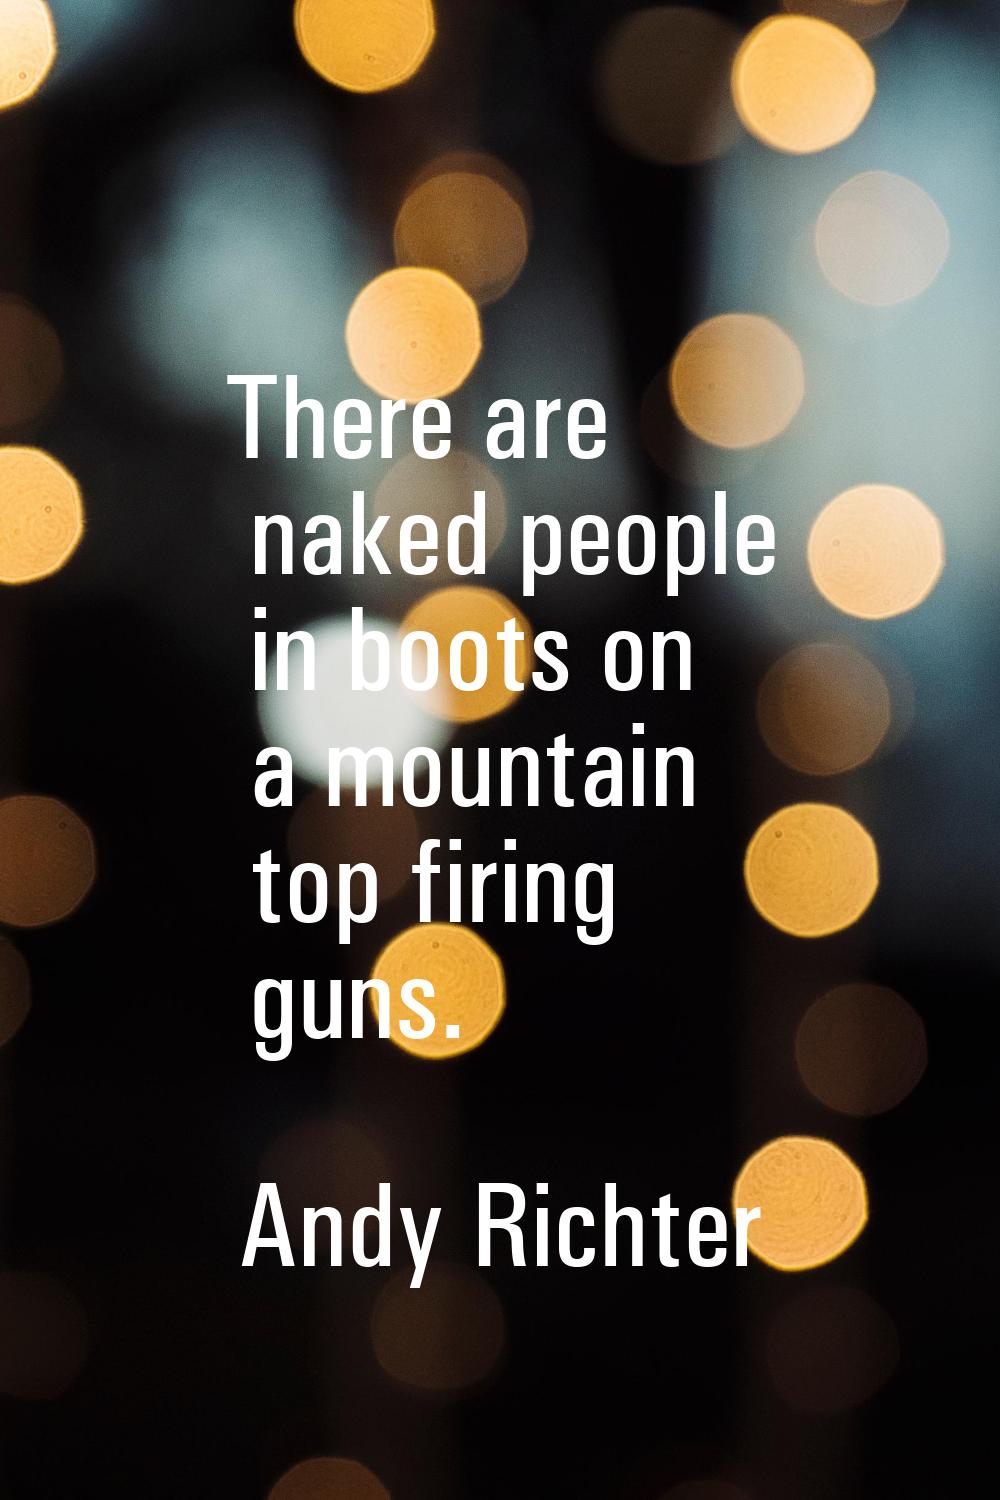 There are naked people in boots on a mountain top firing guns.